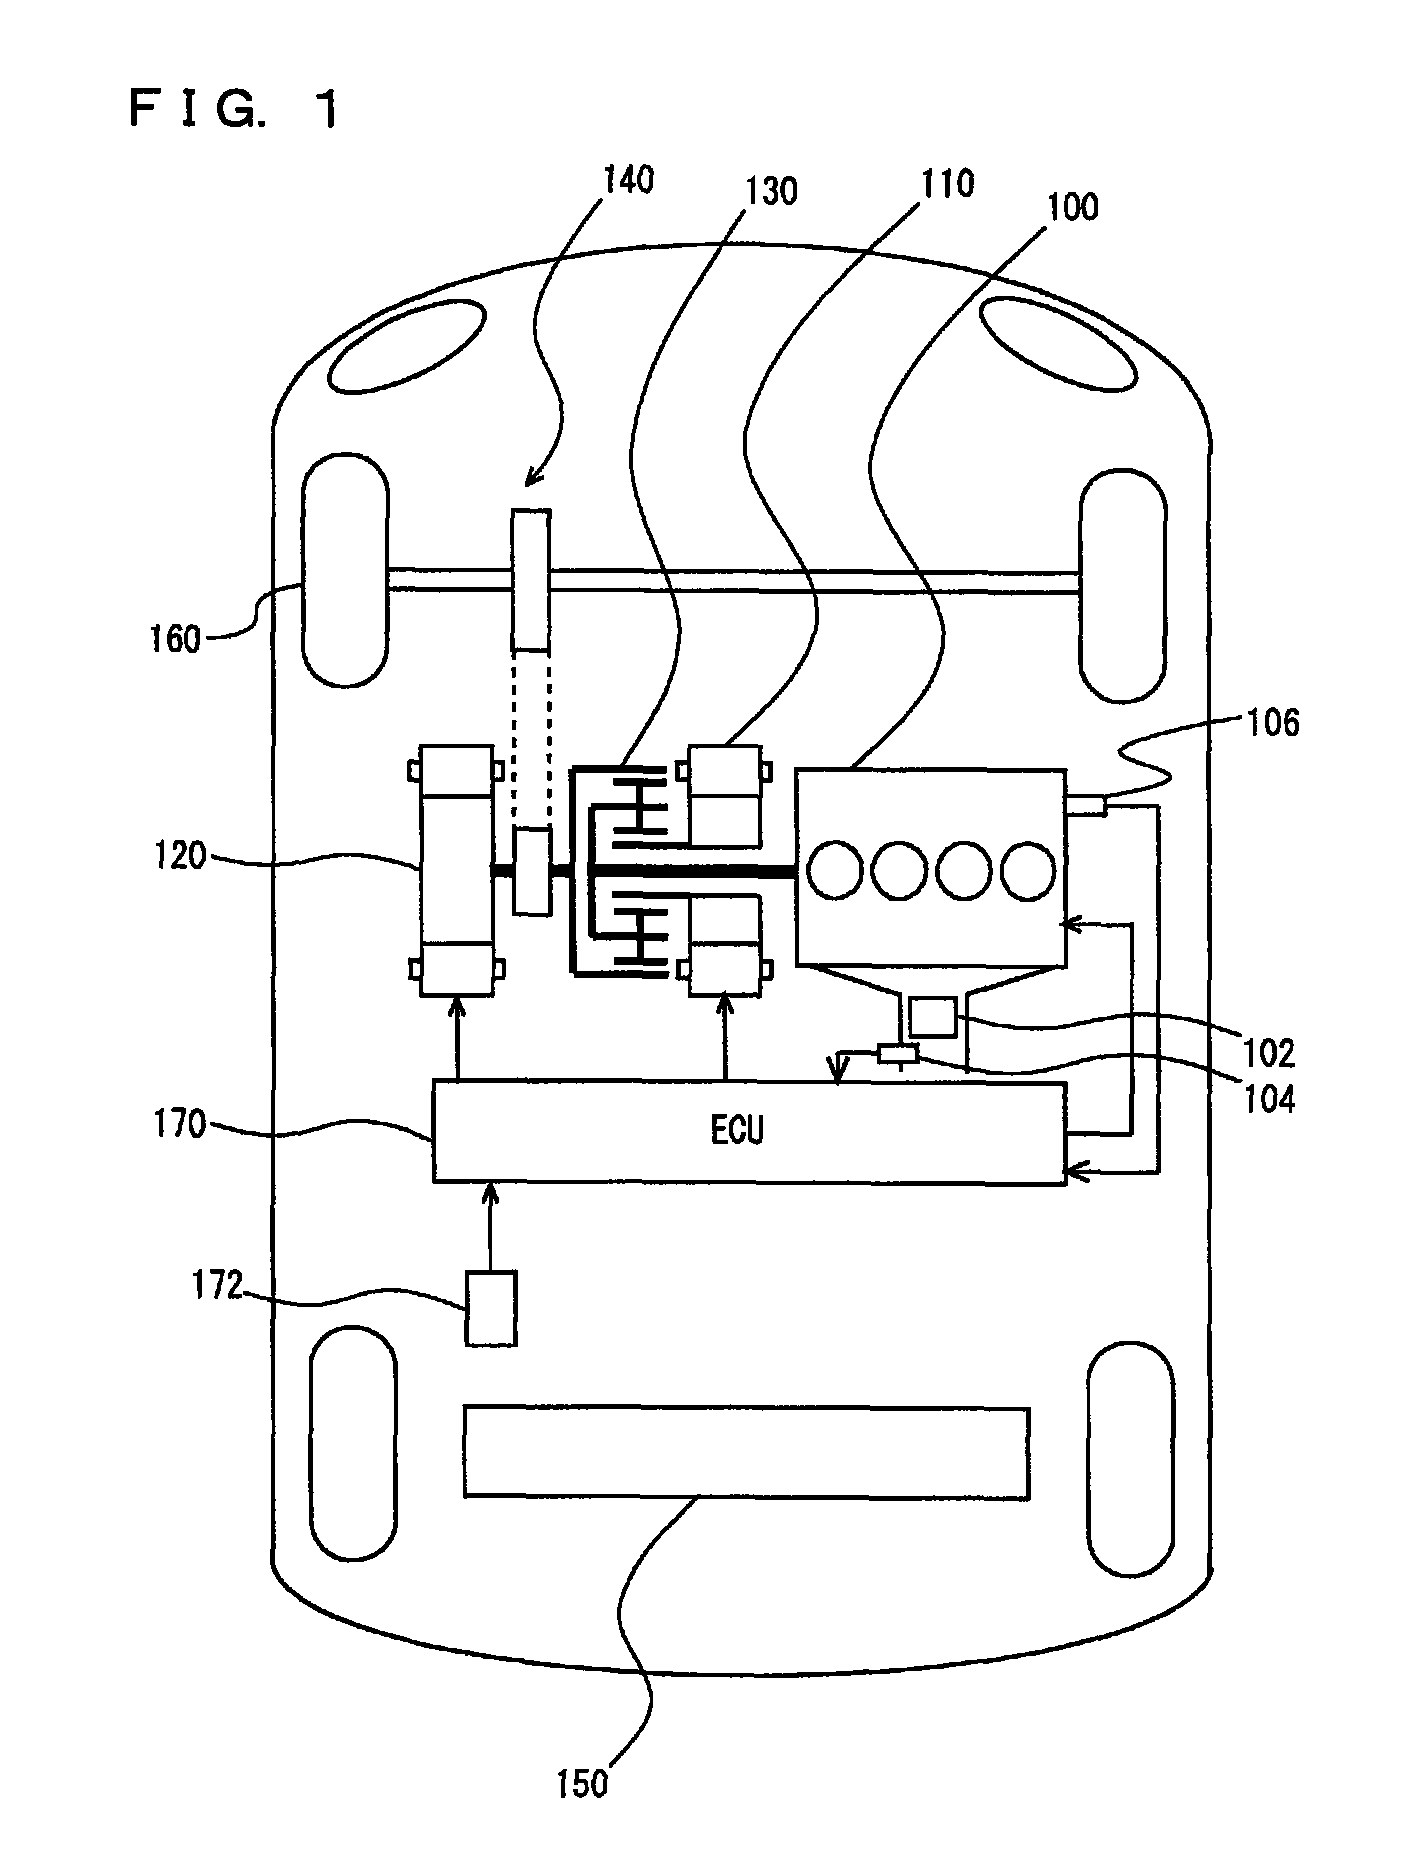 Vehicle, method and device for controlling engine